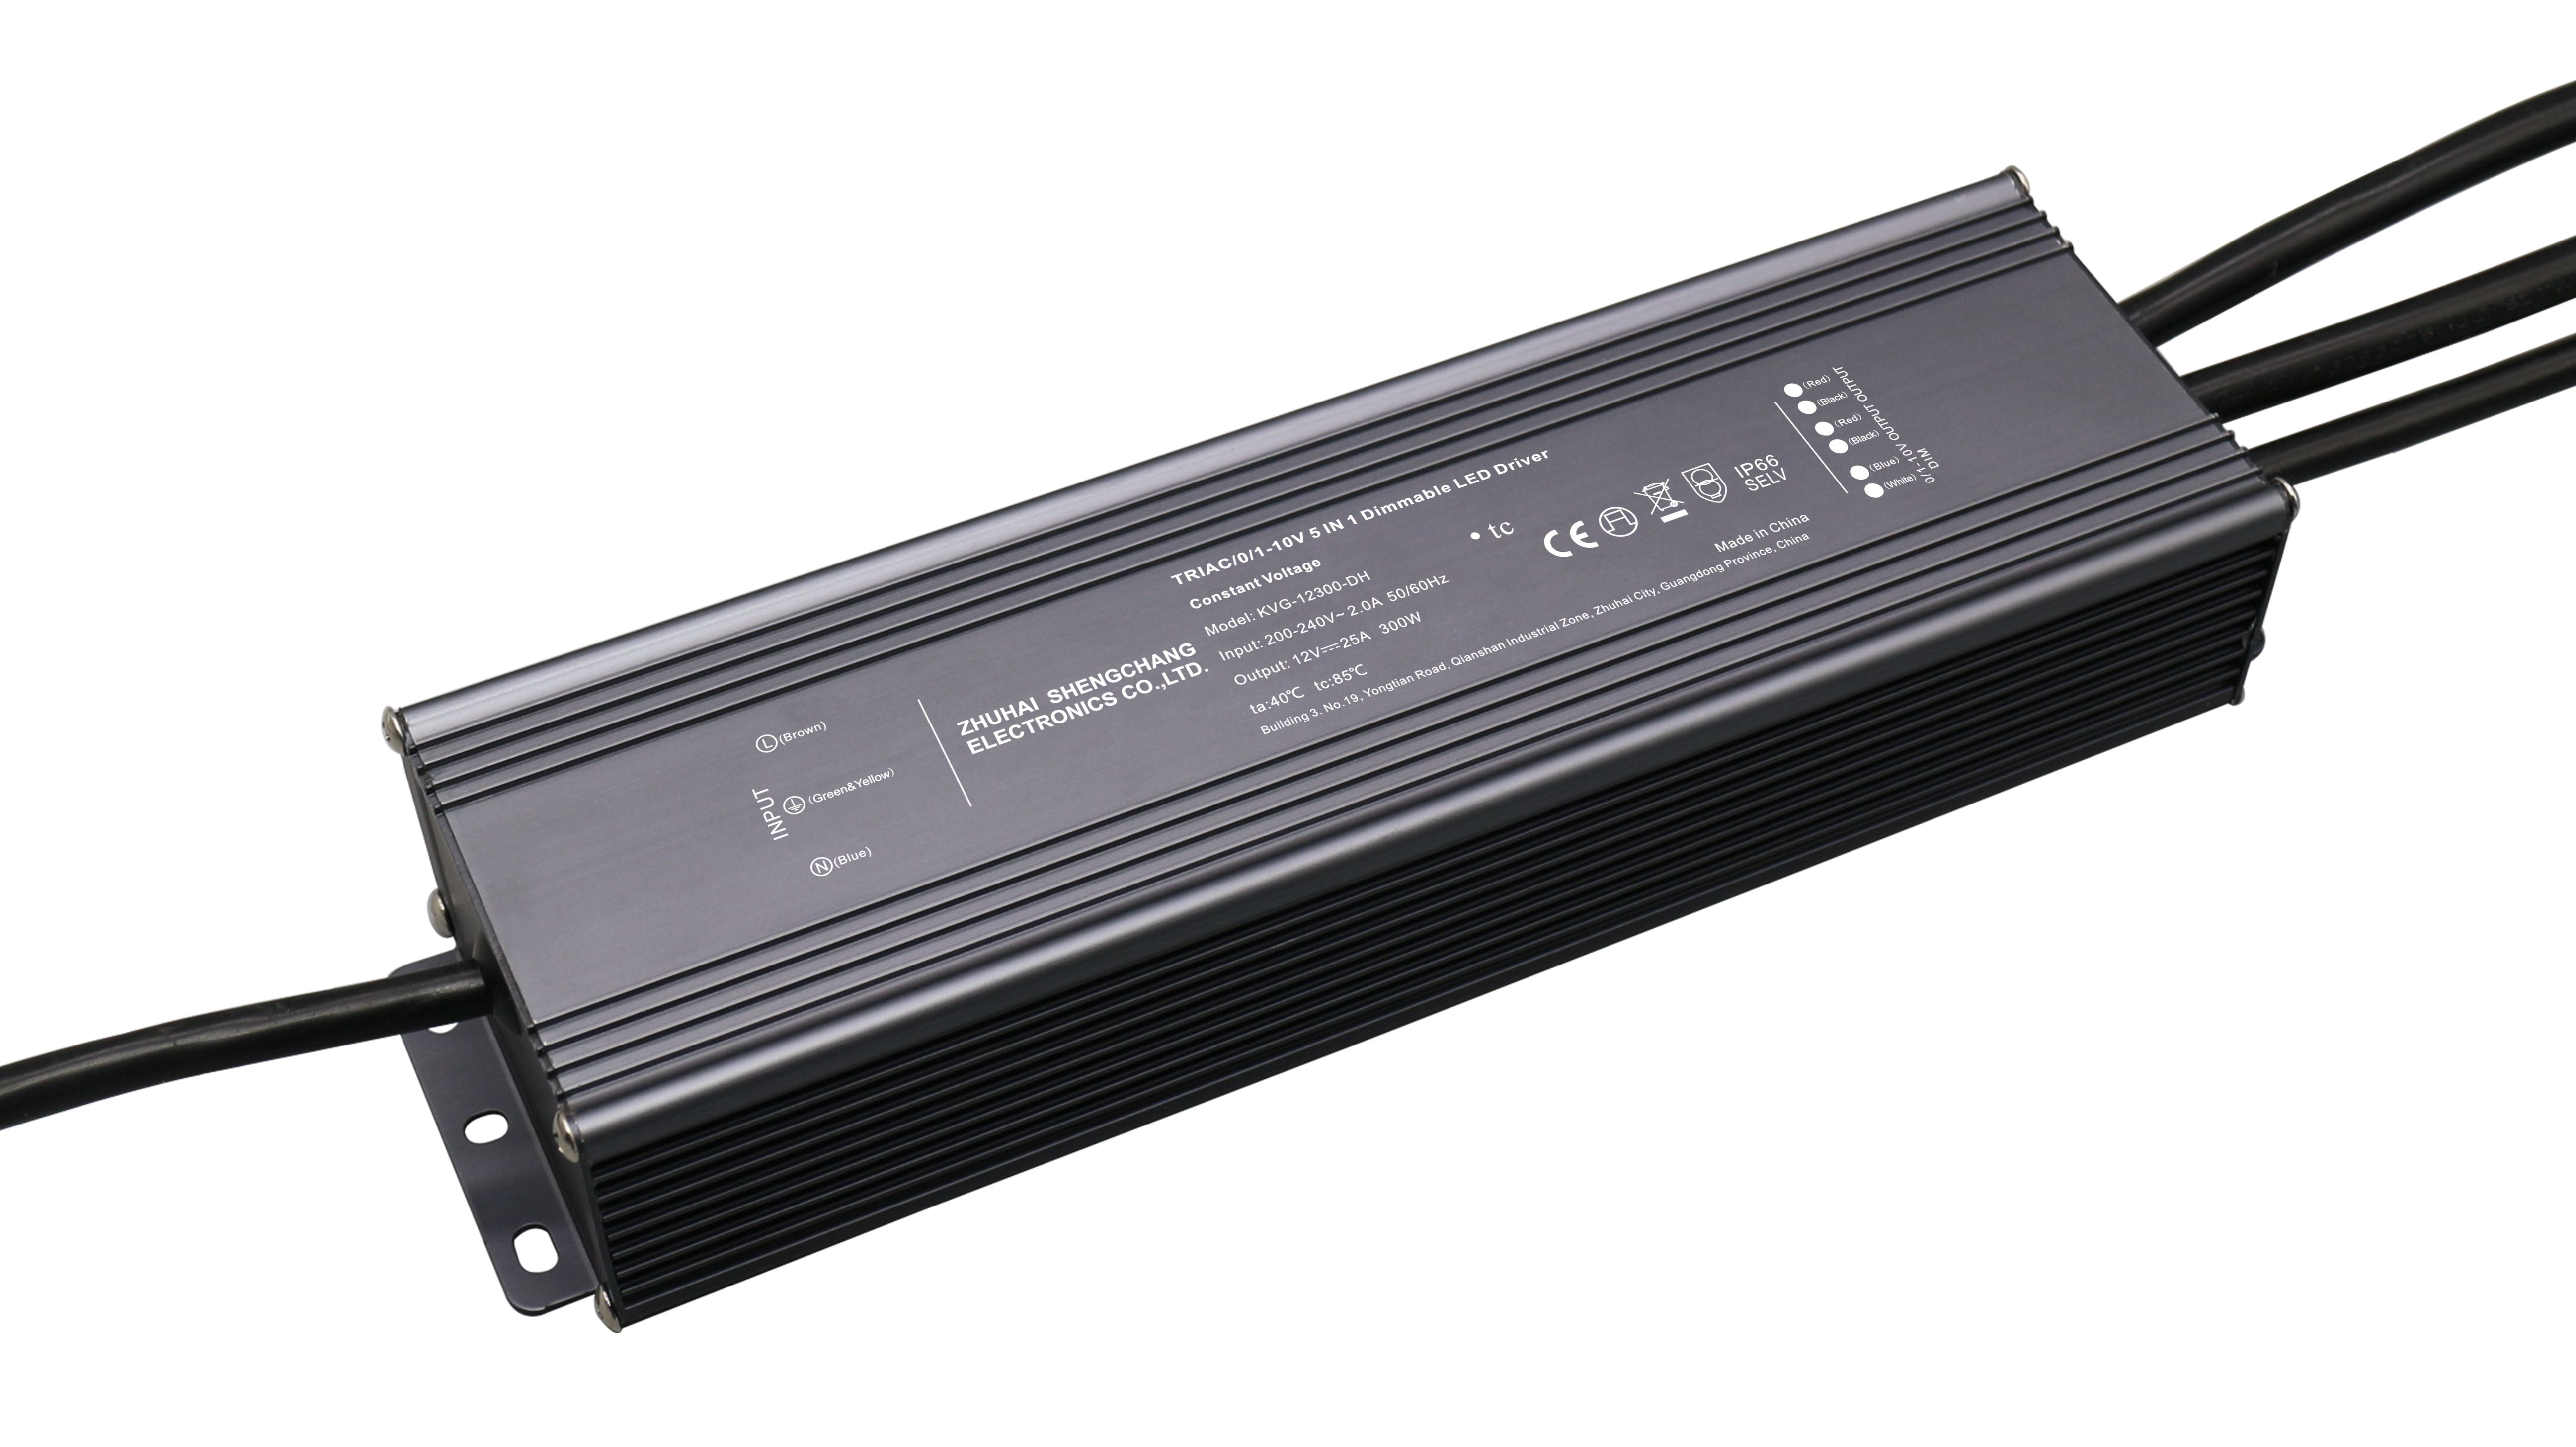 KVG-DH Series 300W Constant Voltage Triac&0/1-10V Dimmable LED driver